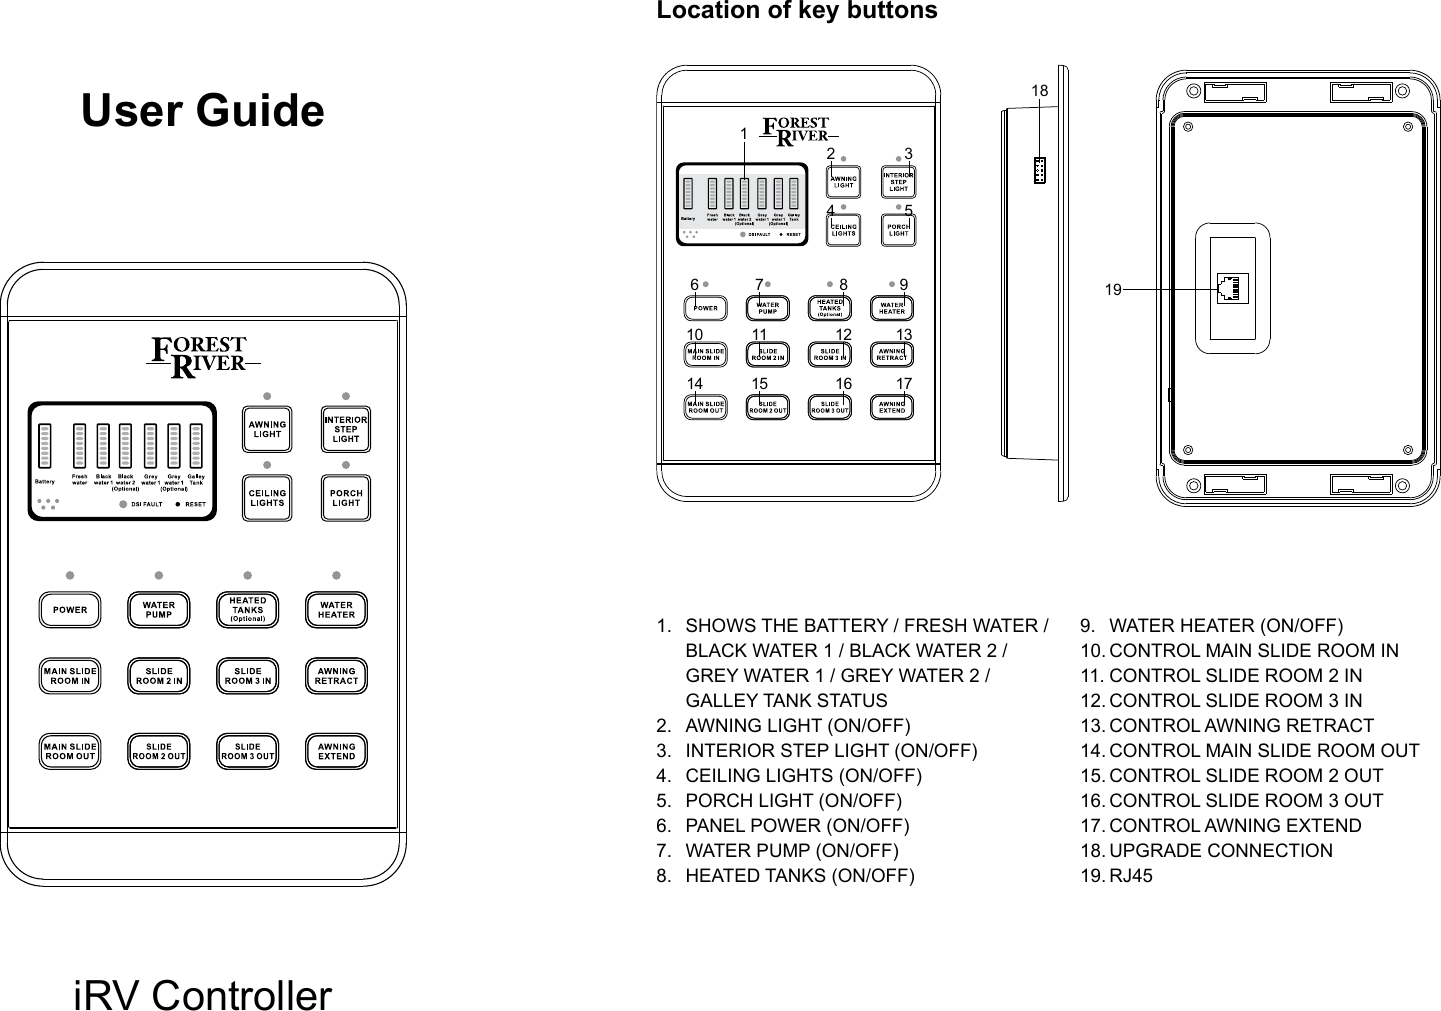 User GuideiRV ControllerLocation of key buttons1.  SHOWS THE BATTERY / FRESH WATER /  BLACK WATER 1 / BLACK WATER 2 /  GREY WATER 1 / GREY WATER 2 /  GALLEY TANK STATUS2.  AWNING LIGHT (ON/OFF)3.  INTERIOR STEP LIGHT (ON/OFF)4.  CEILING LIGHTS (ON/OFF)5.  PORCH LIGHT (ON/OFF)6.  PANEL POWER (ON/OFF)7.  WATER PUMP (ON/OFF)8.  HEATED TANKS (ON/OFF)9.  WATER HEATER (ON/OFF)10. CONTROL MAIN SLIDE ROOM IN11. CONTROL SLIDE ROOM 2 IN12. CONTROL SLIDE ROOM 3 IN13. CONTROL AWNING RETRACT14. CONTROL MAIN SLIDE ROOM OUT15. CONTROL SLIDE ROOM 2 OUT16. CONTROL SLIDE ROOM 3 OUT17. CONTROL AWNING EXTEND18. UPGRADE CONNECTION19. RJ452 34 5118196 7 8 910 11 12 1314 15 16 17